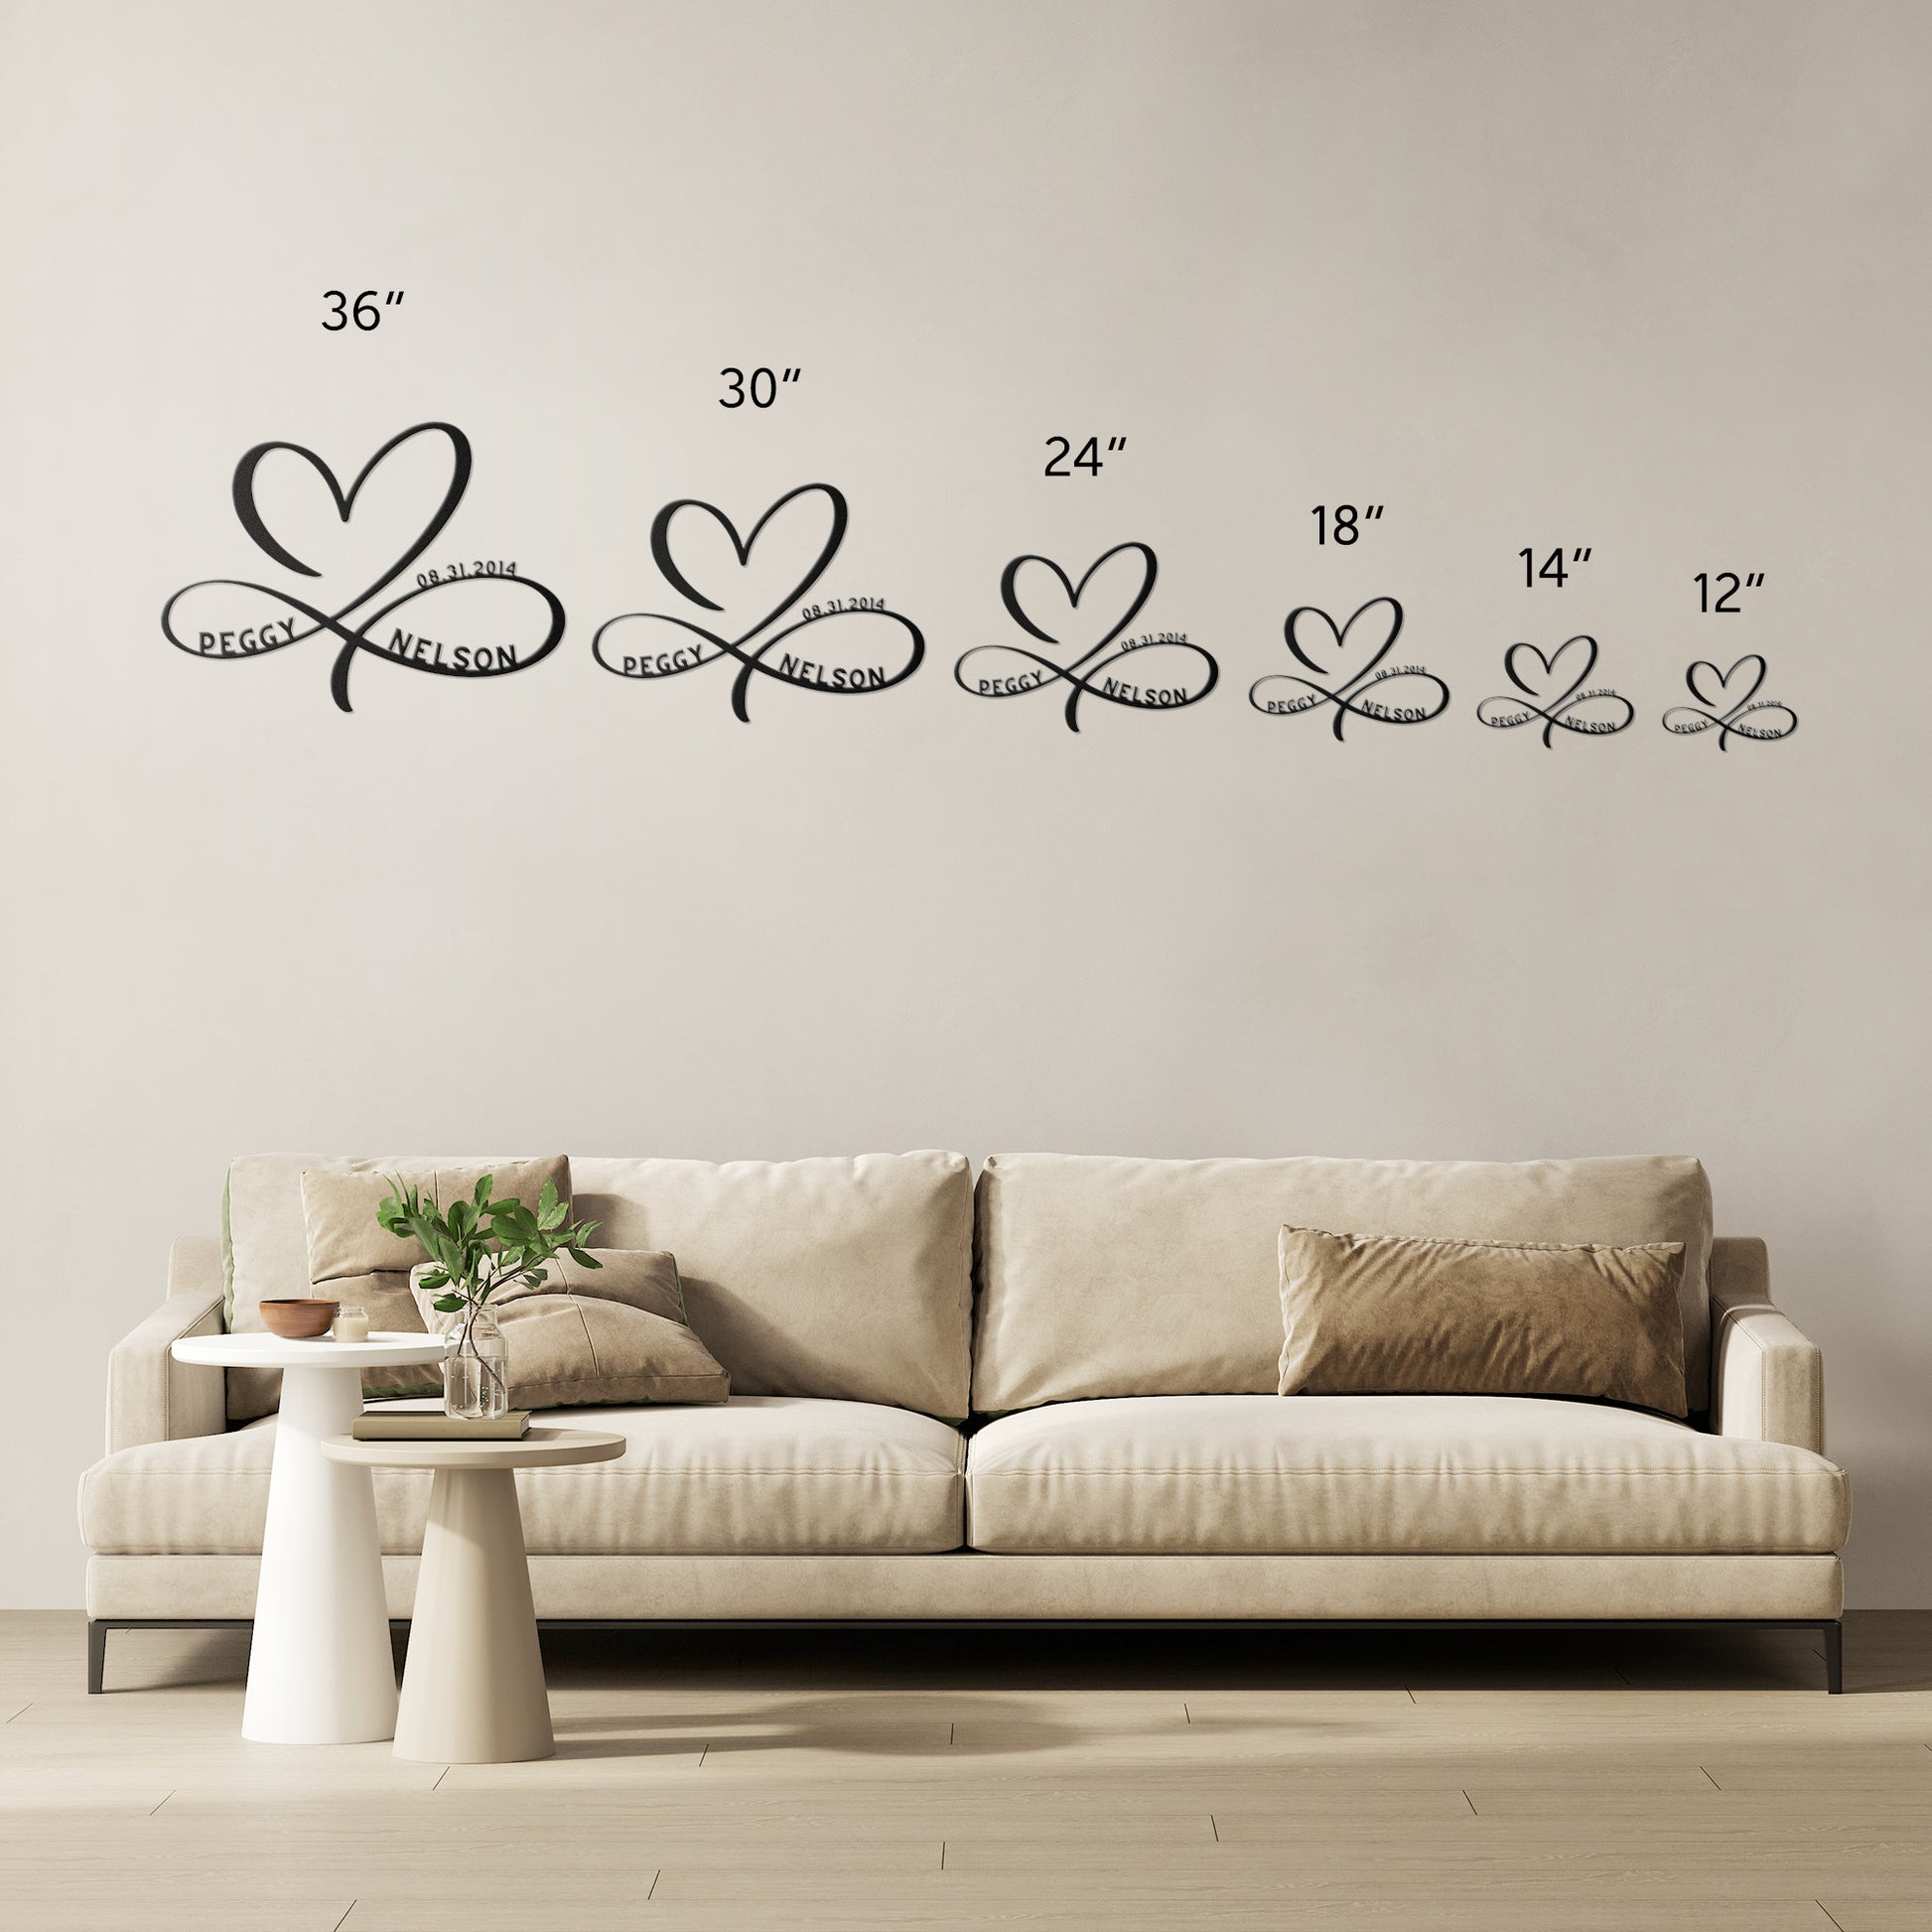 This Personalized Infinity Love Heart Metal Art Sign by teelaunch features a shamrock wall decal and is made of powder coated 18 gauge steel.